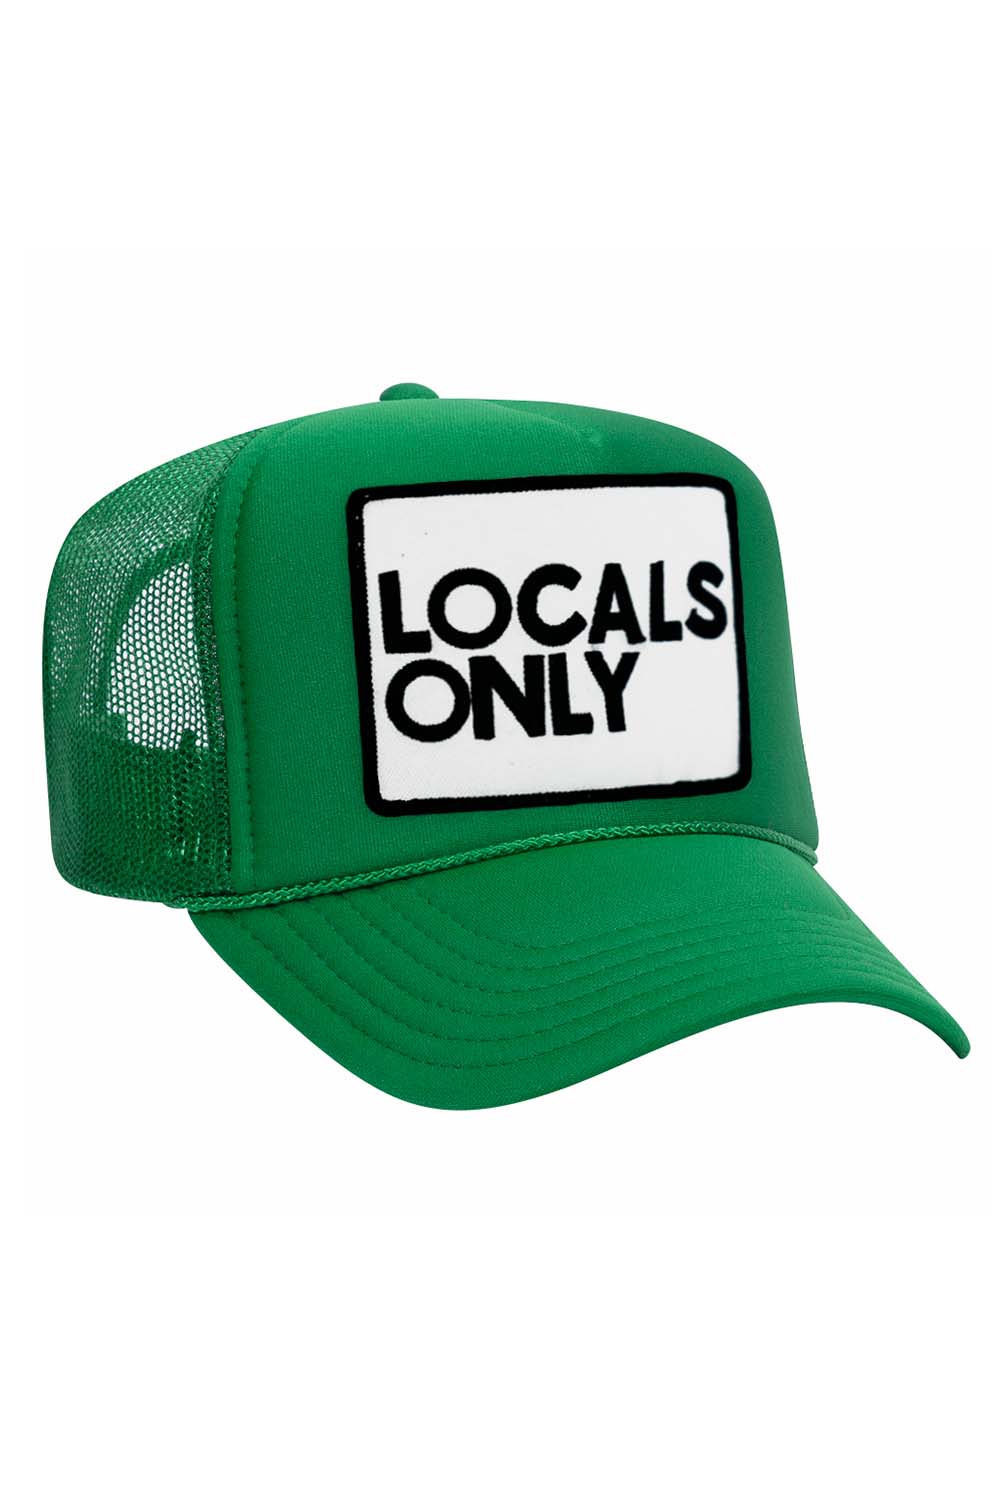 LOCALS ONLY VINTAGE TRUCKER HAT HATS Aviator Nation OS KELLY GREEN 